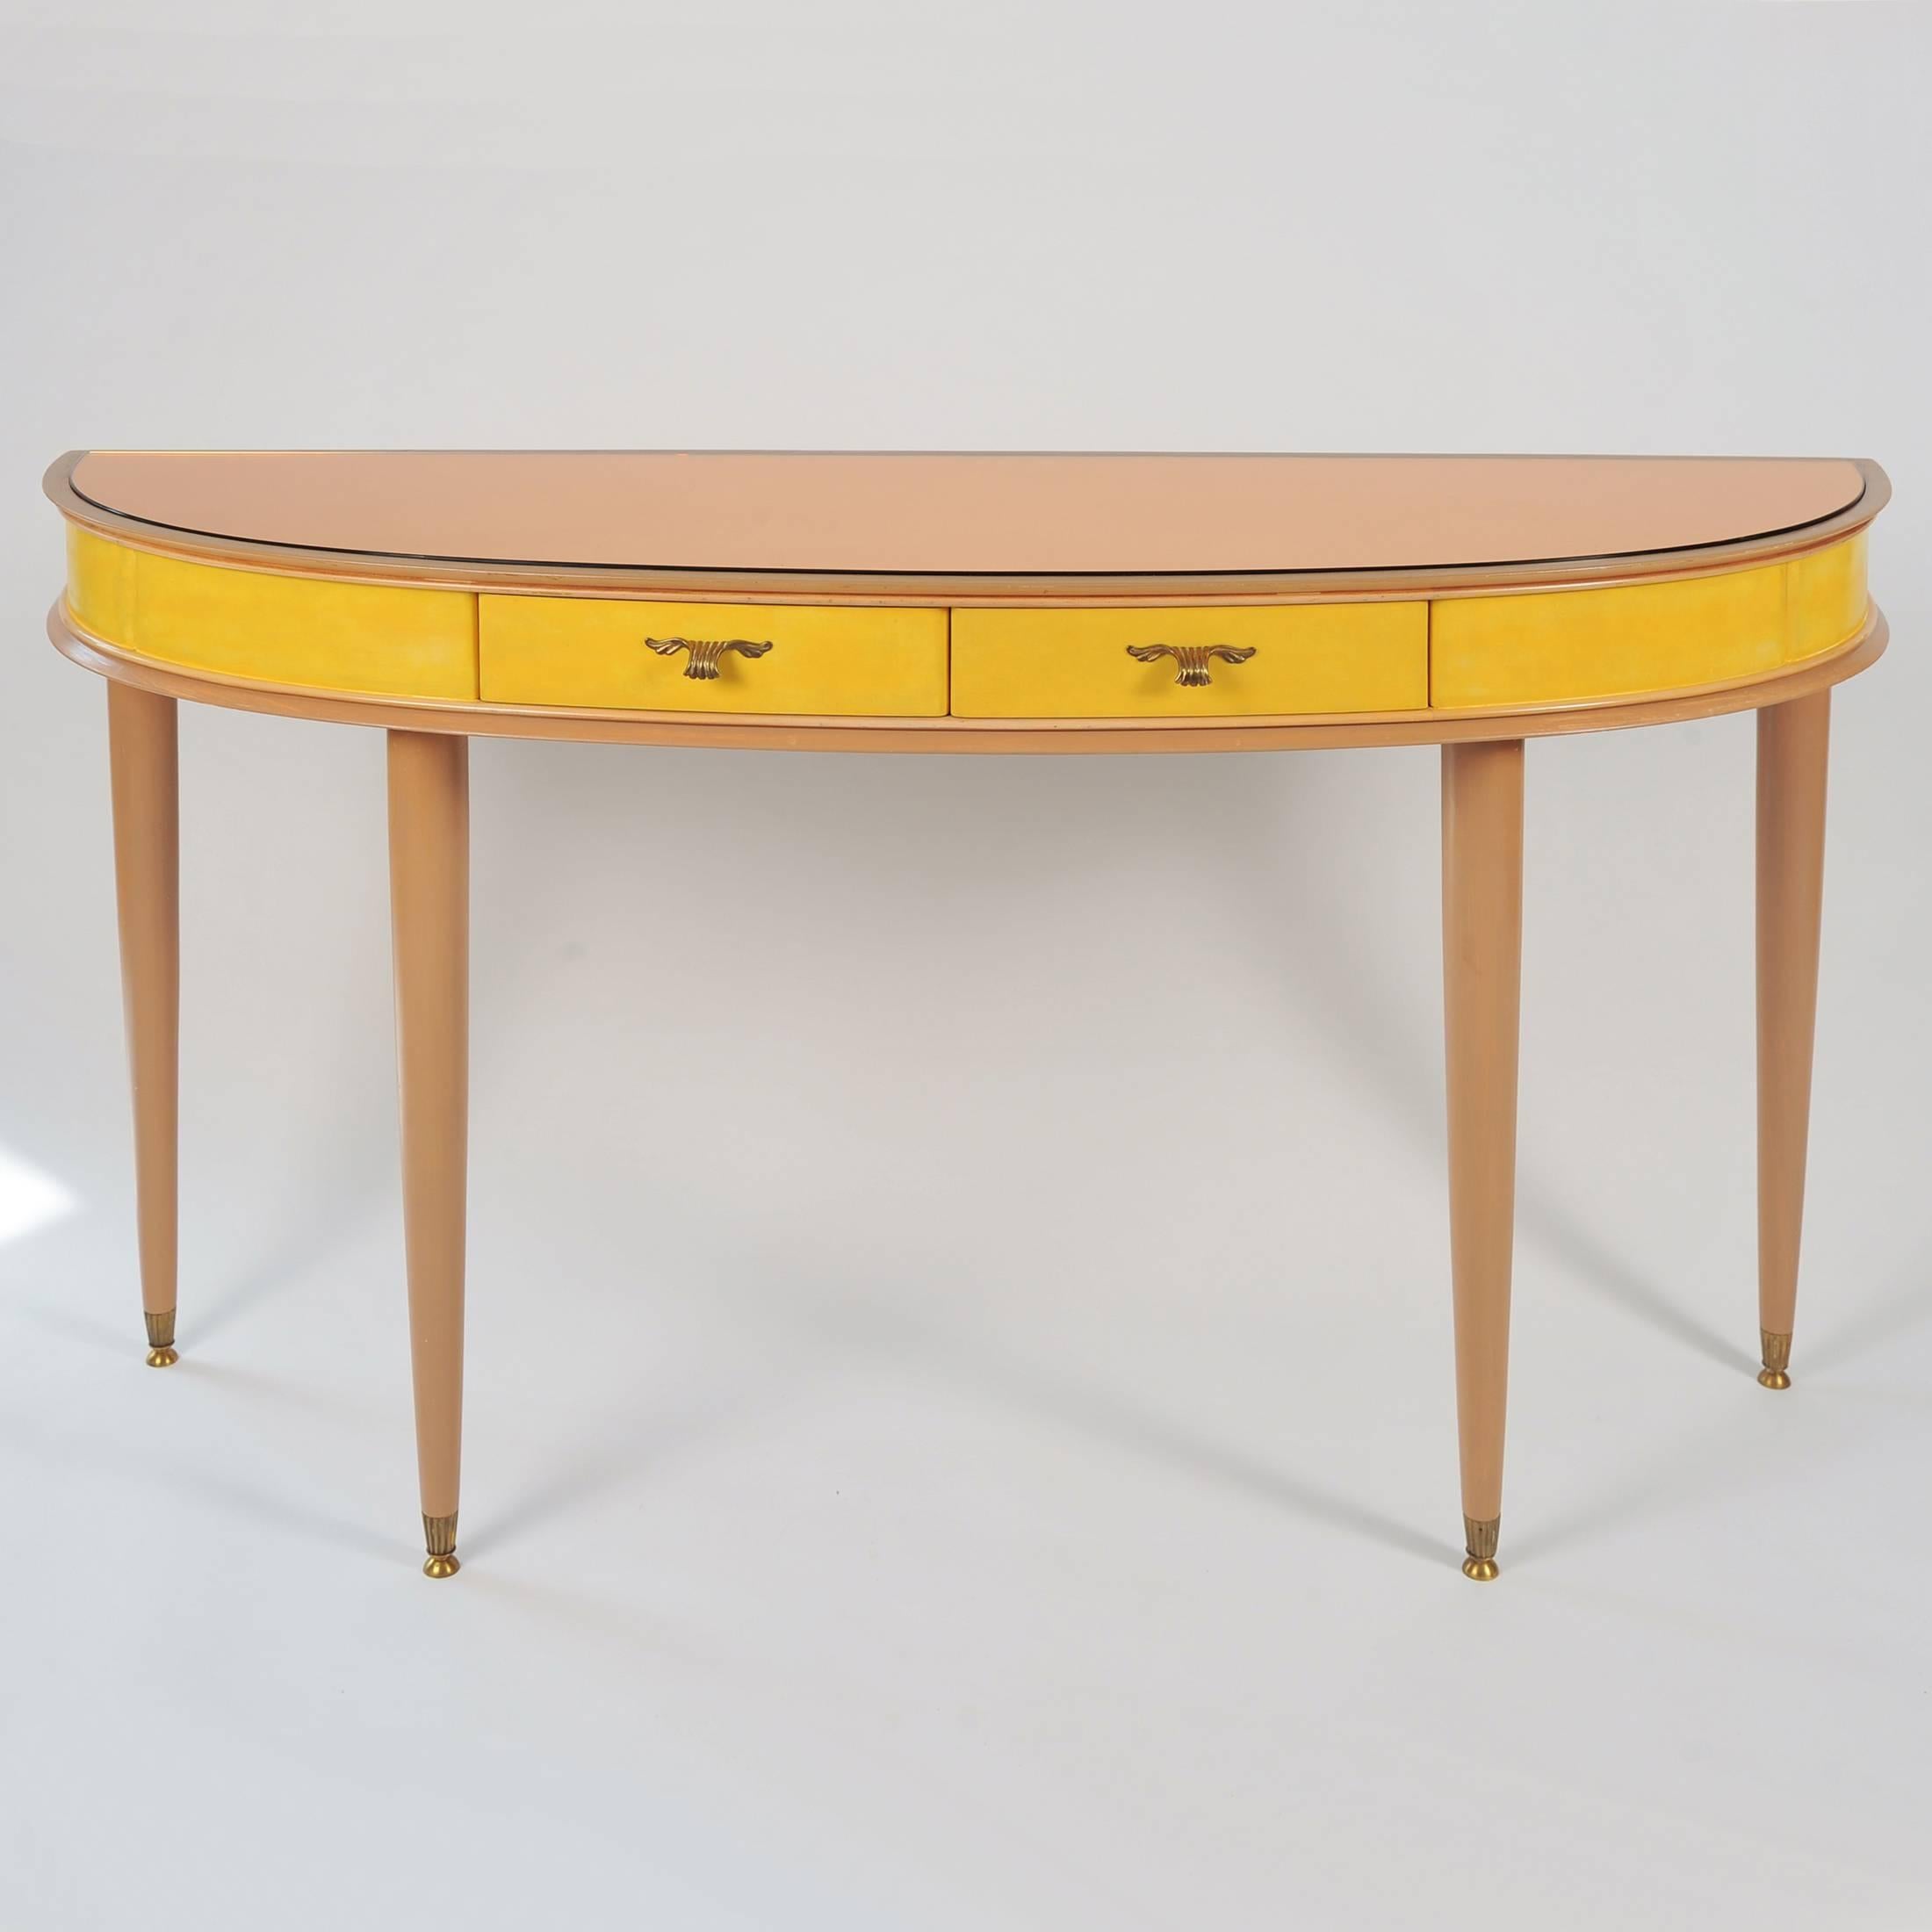 Painted fruitwood two-drawer sideboard or vanity-table on elegant tapered circular legs, with peach glass effect on top surface; the drawers and main body painted in a vivid yellow and fitted with delicate brass handles. See our separate entry for